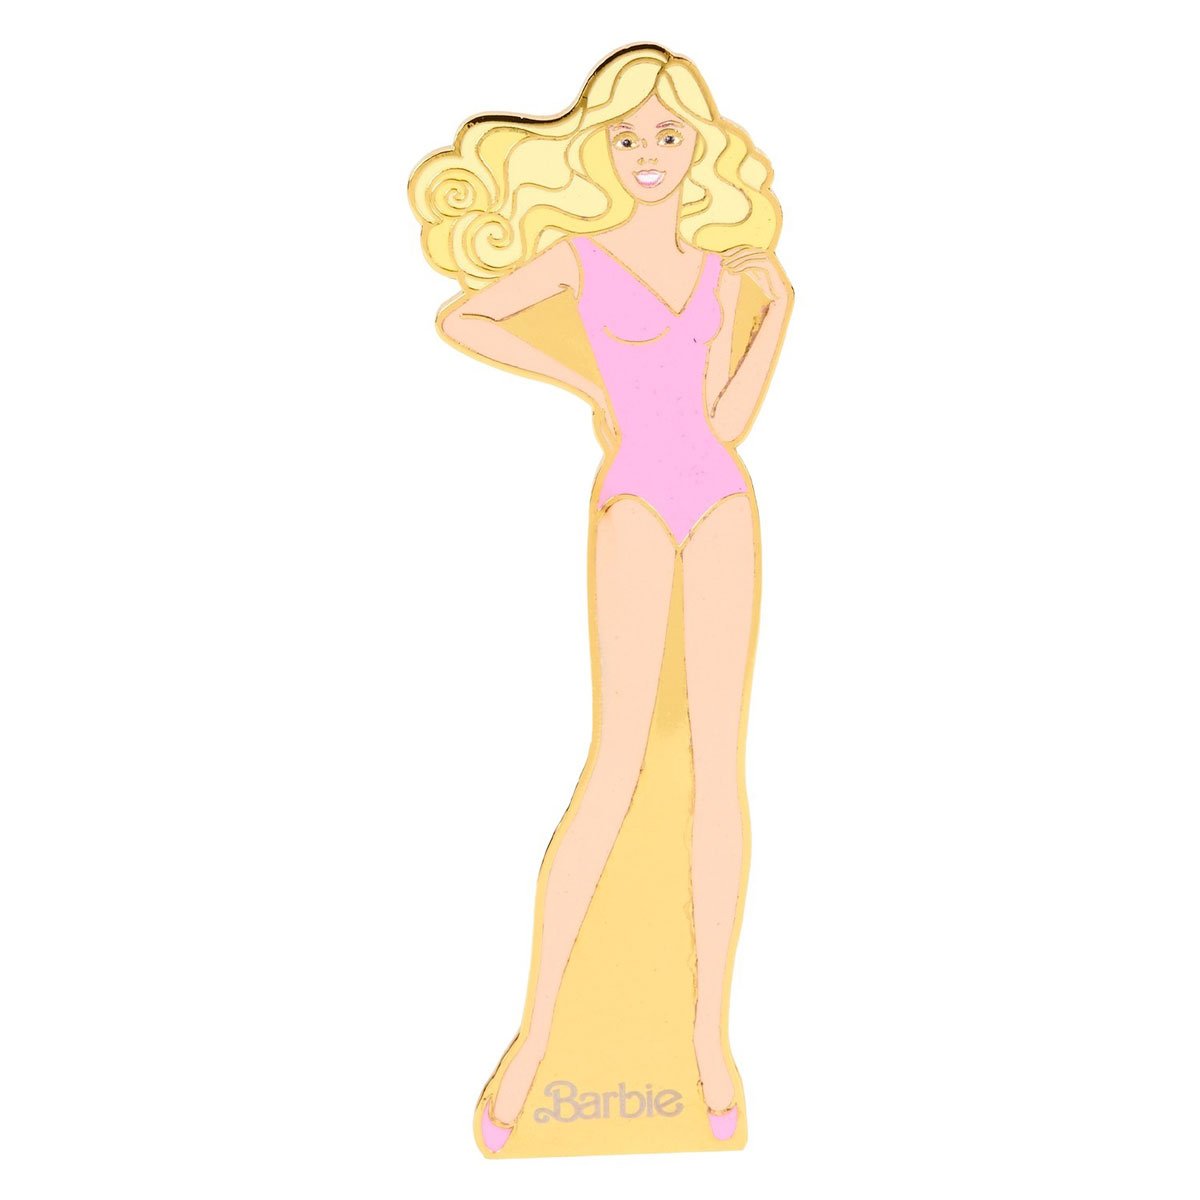 Magnetic pin of Barbie wearing a classic pink swimsuit, with her long blonde hair flowing and hands on her hips, commemorating the 65th anniversary.